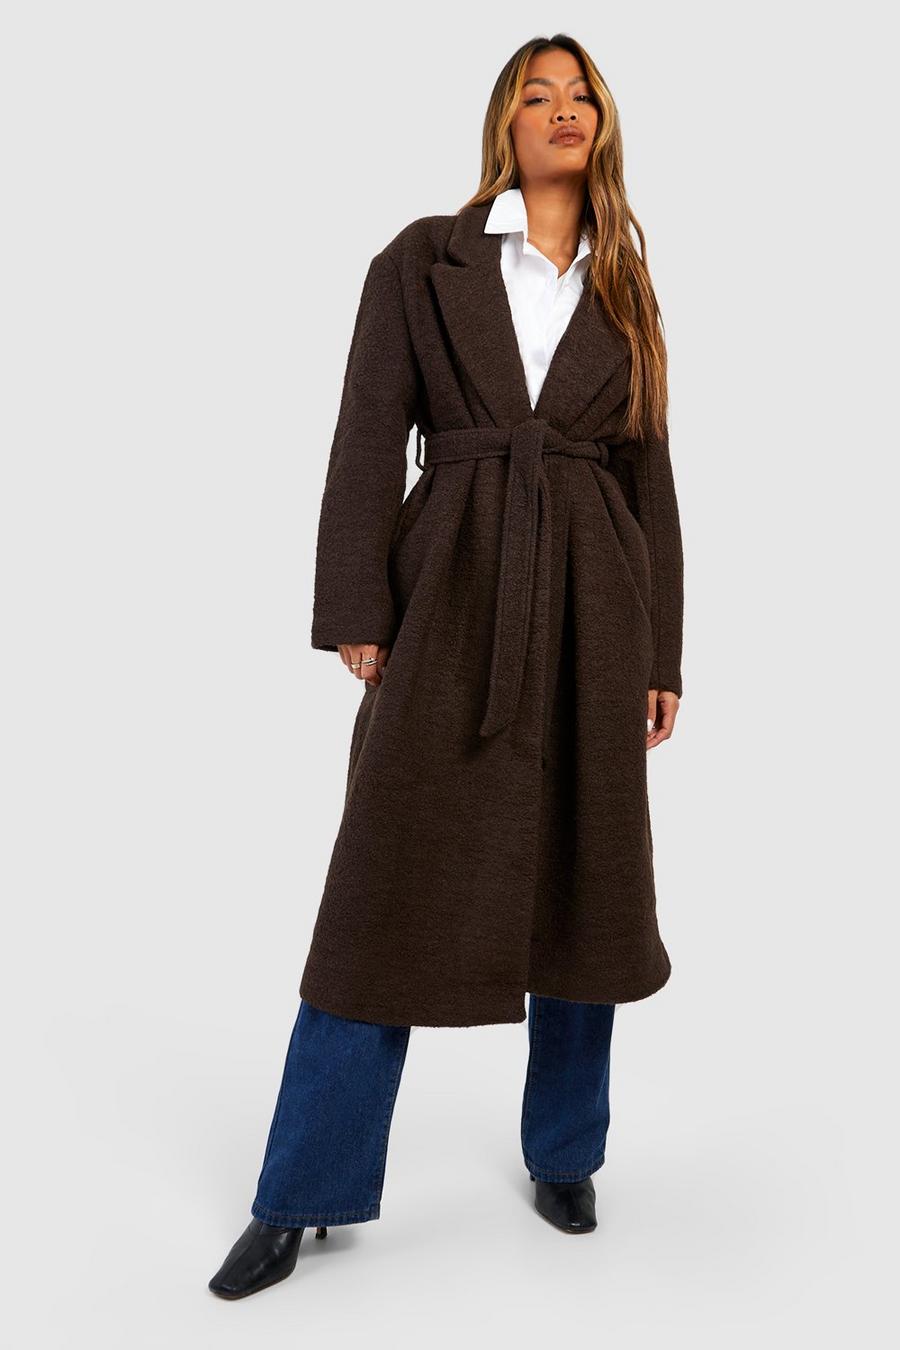 Chocolate Petite Boucle Belted Wool Coat